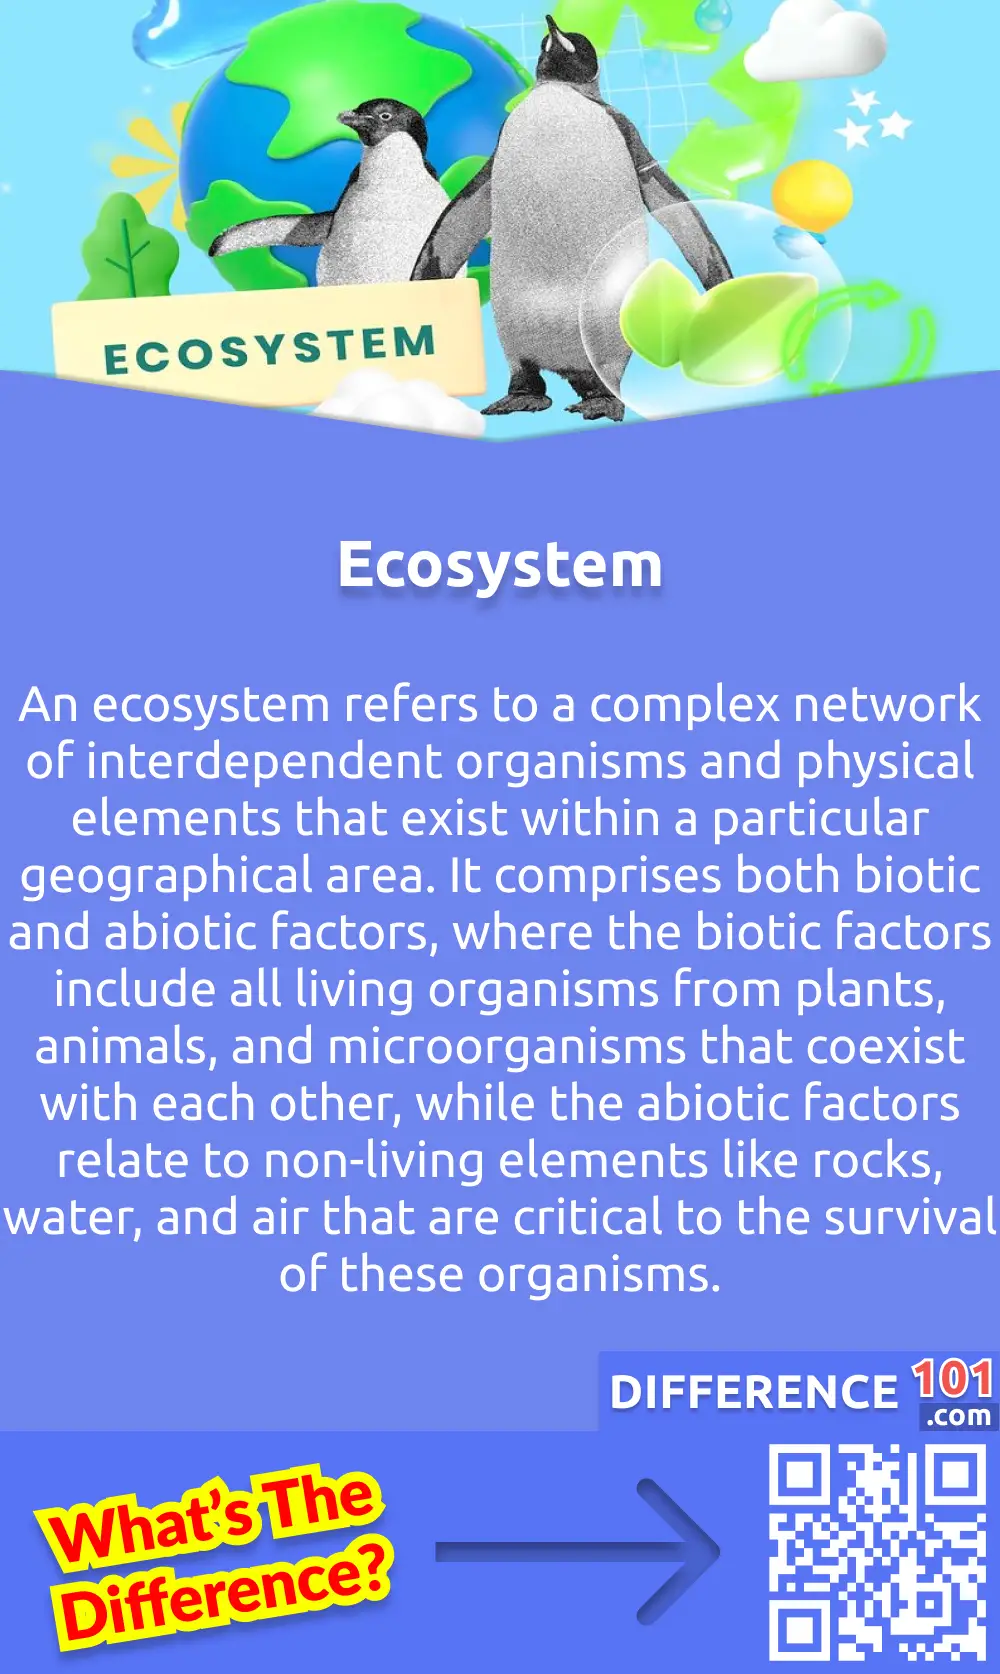 What Is Ecosystem? An ecosystem refers to a complex network of interdependent organisms and physical elements that exist within a particular geographical area. It comprises both biotic and abiotic factors, where the biotic factors include all living organisms from plants, animals, and microorganisms that coexist with each other, while the abiotic factors relate to non-living elements like rocks, water, and air that are critical to the survival of these organisms. An ecosystem can take various forms, such as a forest, a marine environment, or even a human-made environment like a city park. Understanding the interdependence of different living organisms and nonliving elements in an ecosystem is vital for managing and conserving ecosystems for their long-term health and sustainability.